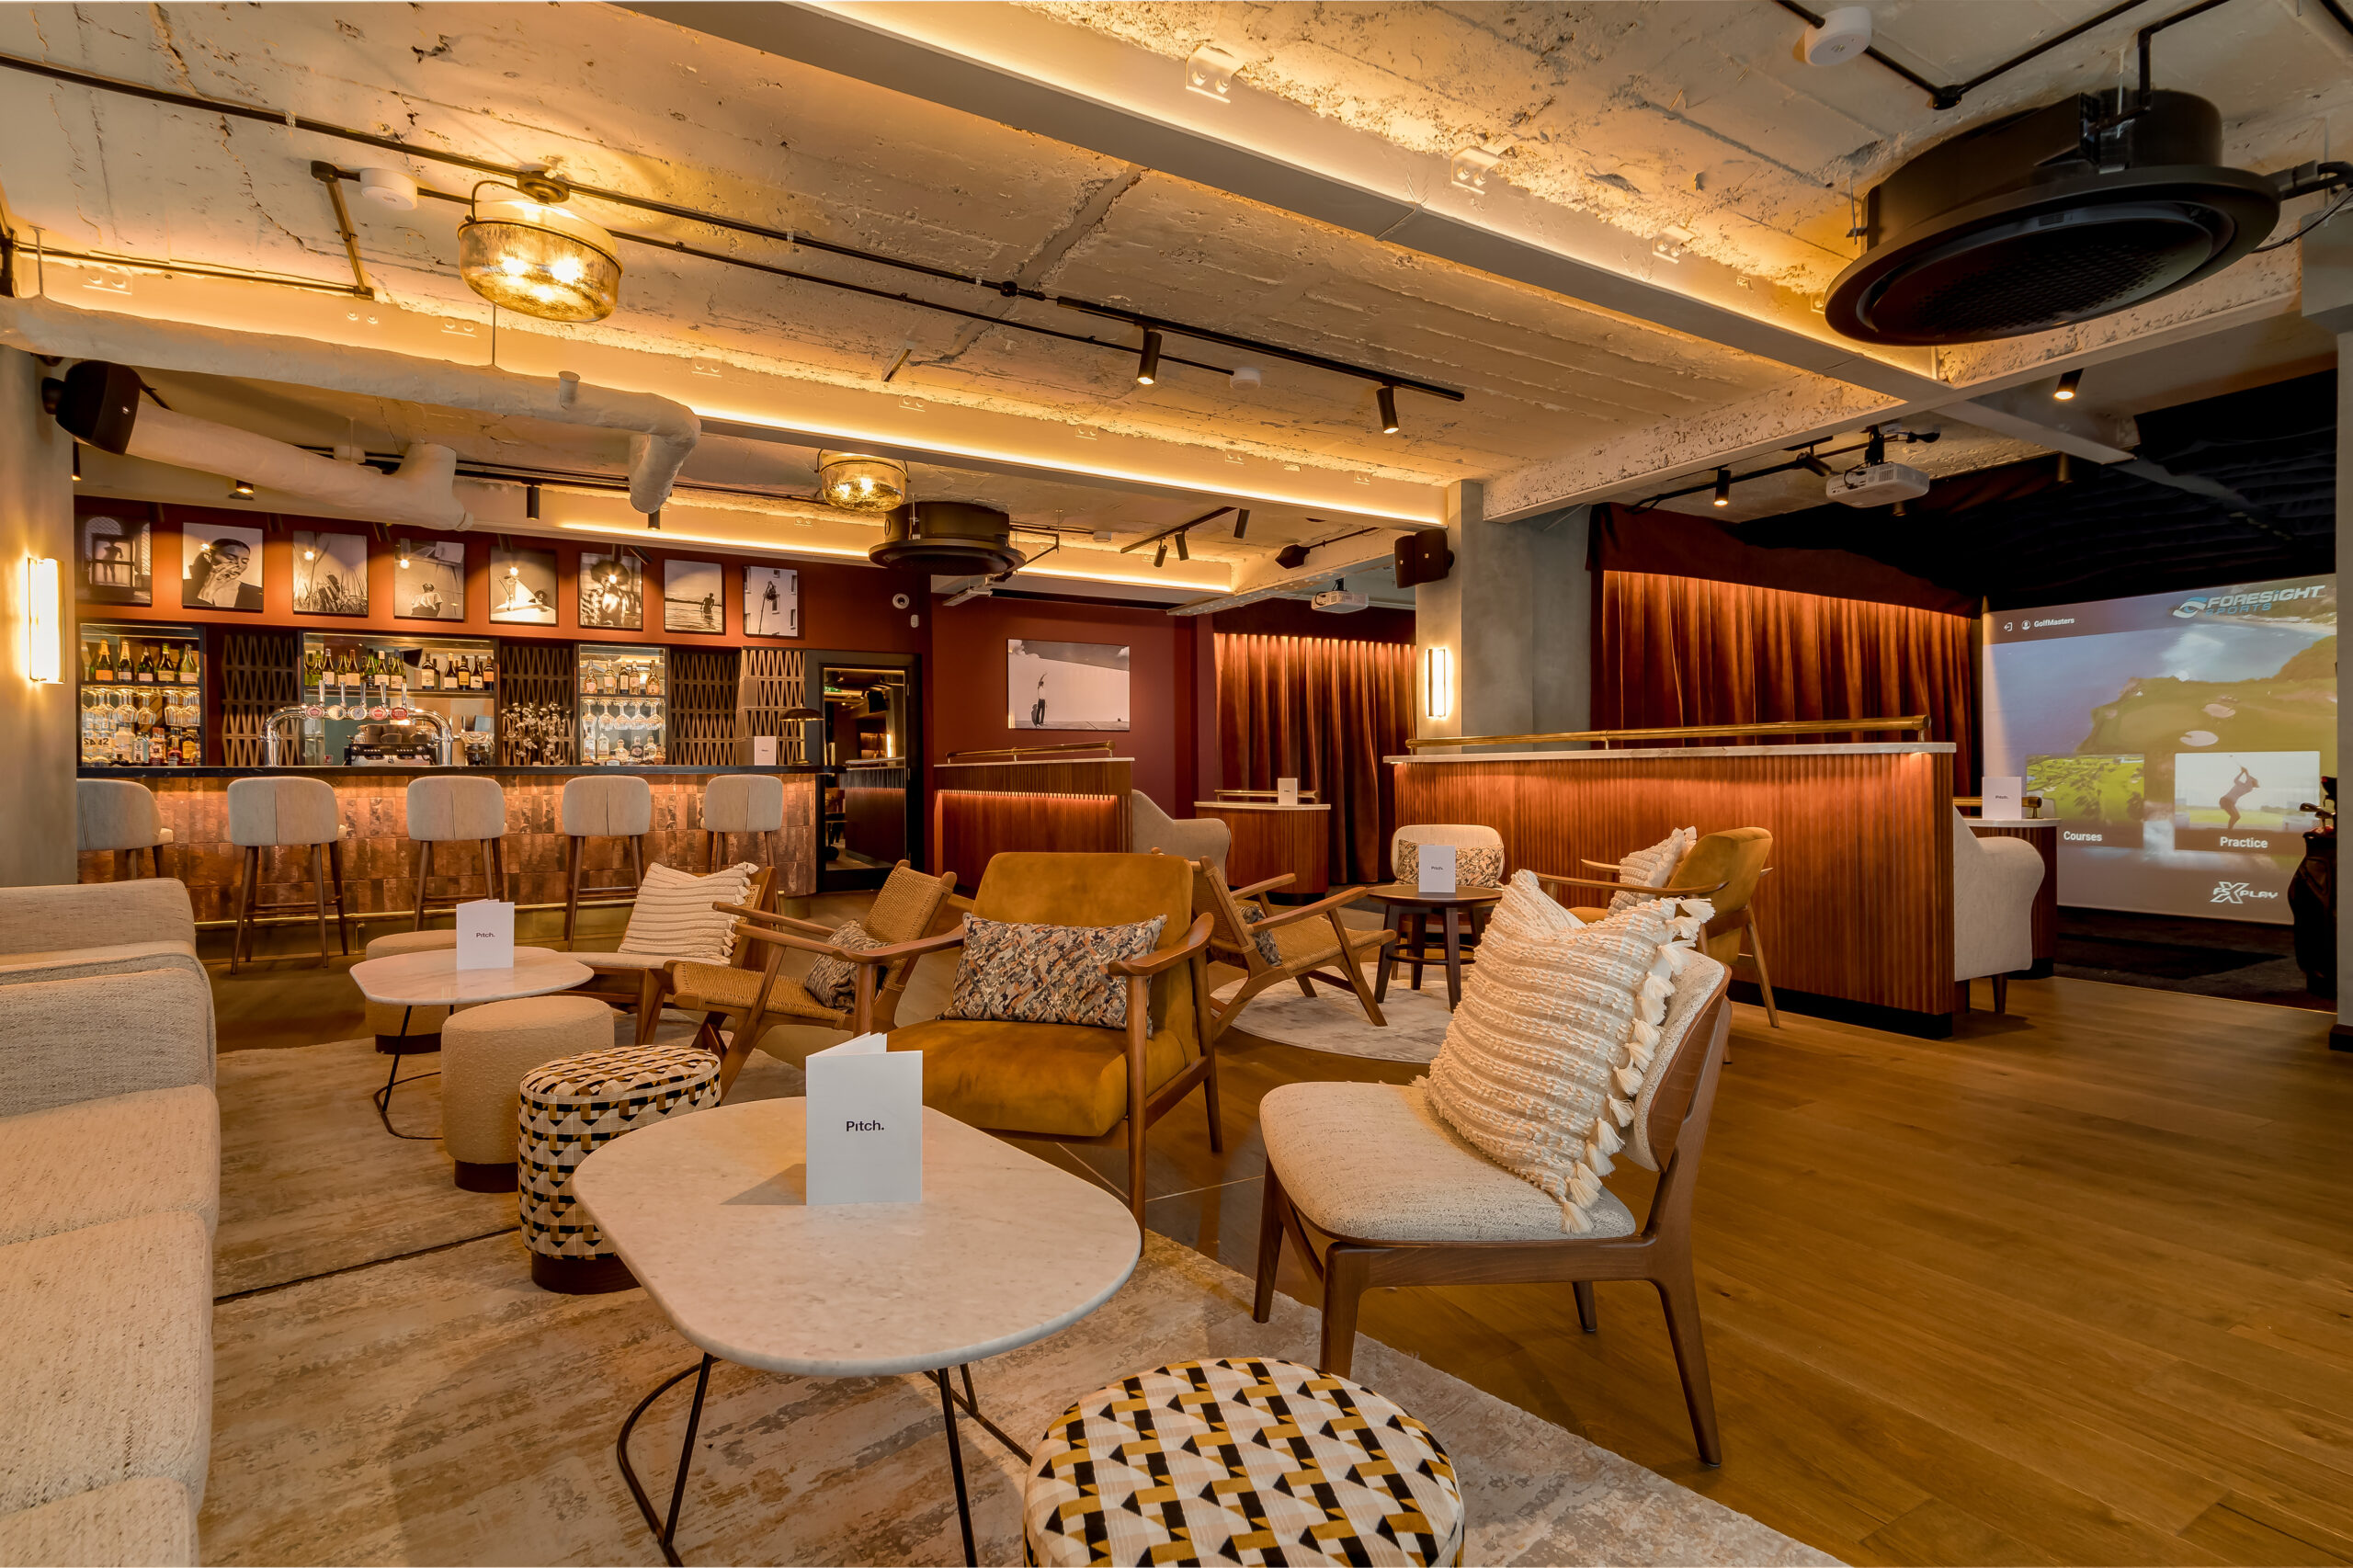 Pitch Soho Golf Bar Lounge and Bays - Event Venue Space | Private Hire | London